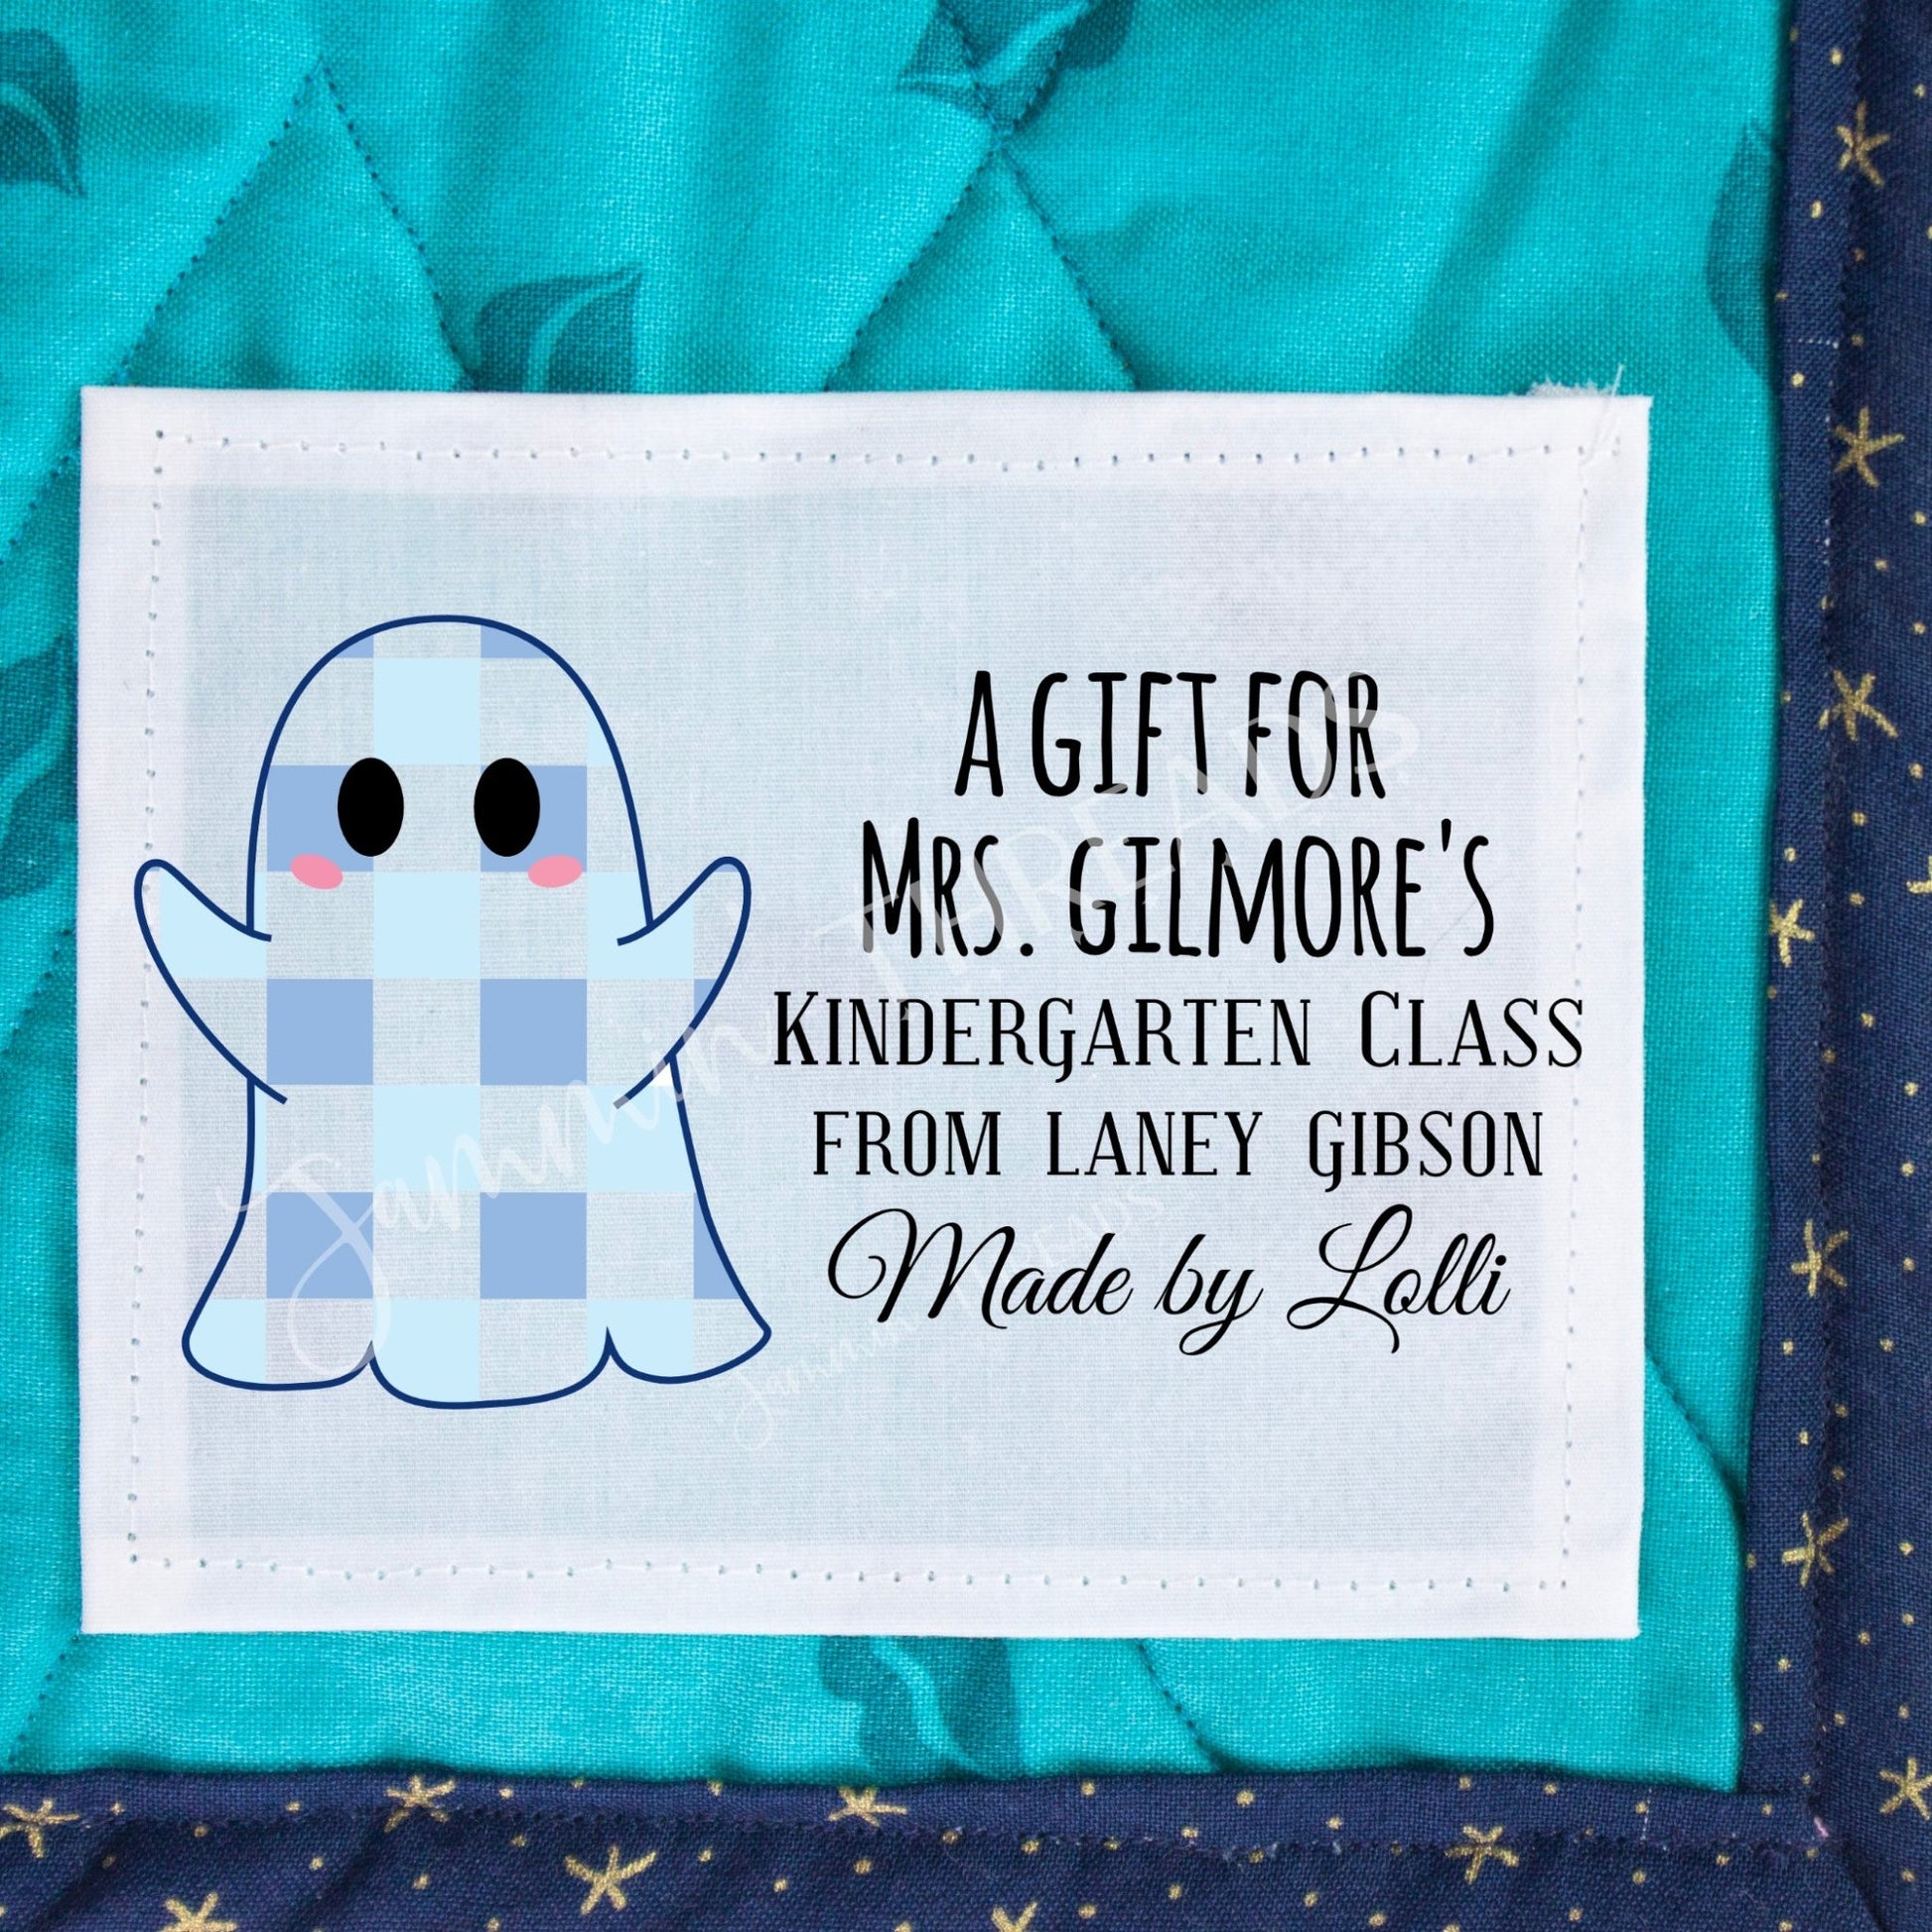 Quilt Ghost Labels - Personalized kid's quilt labels with little ghosts in 2 options - Jammin Threads